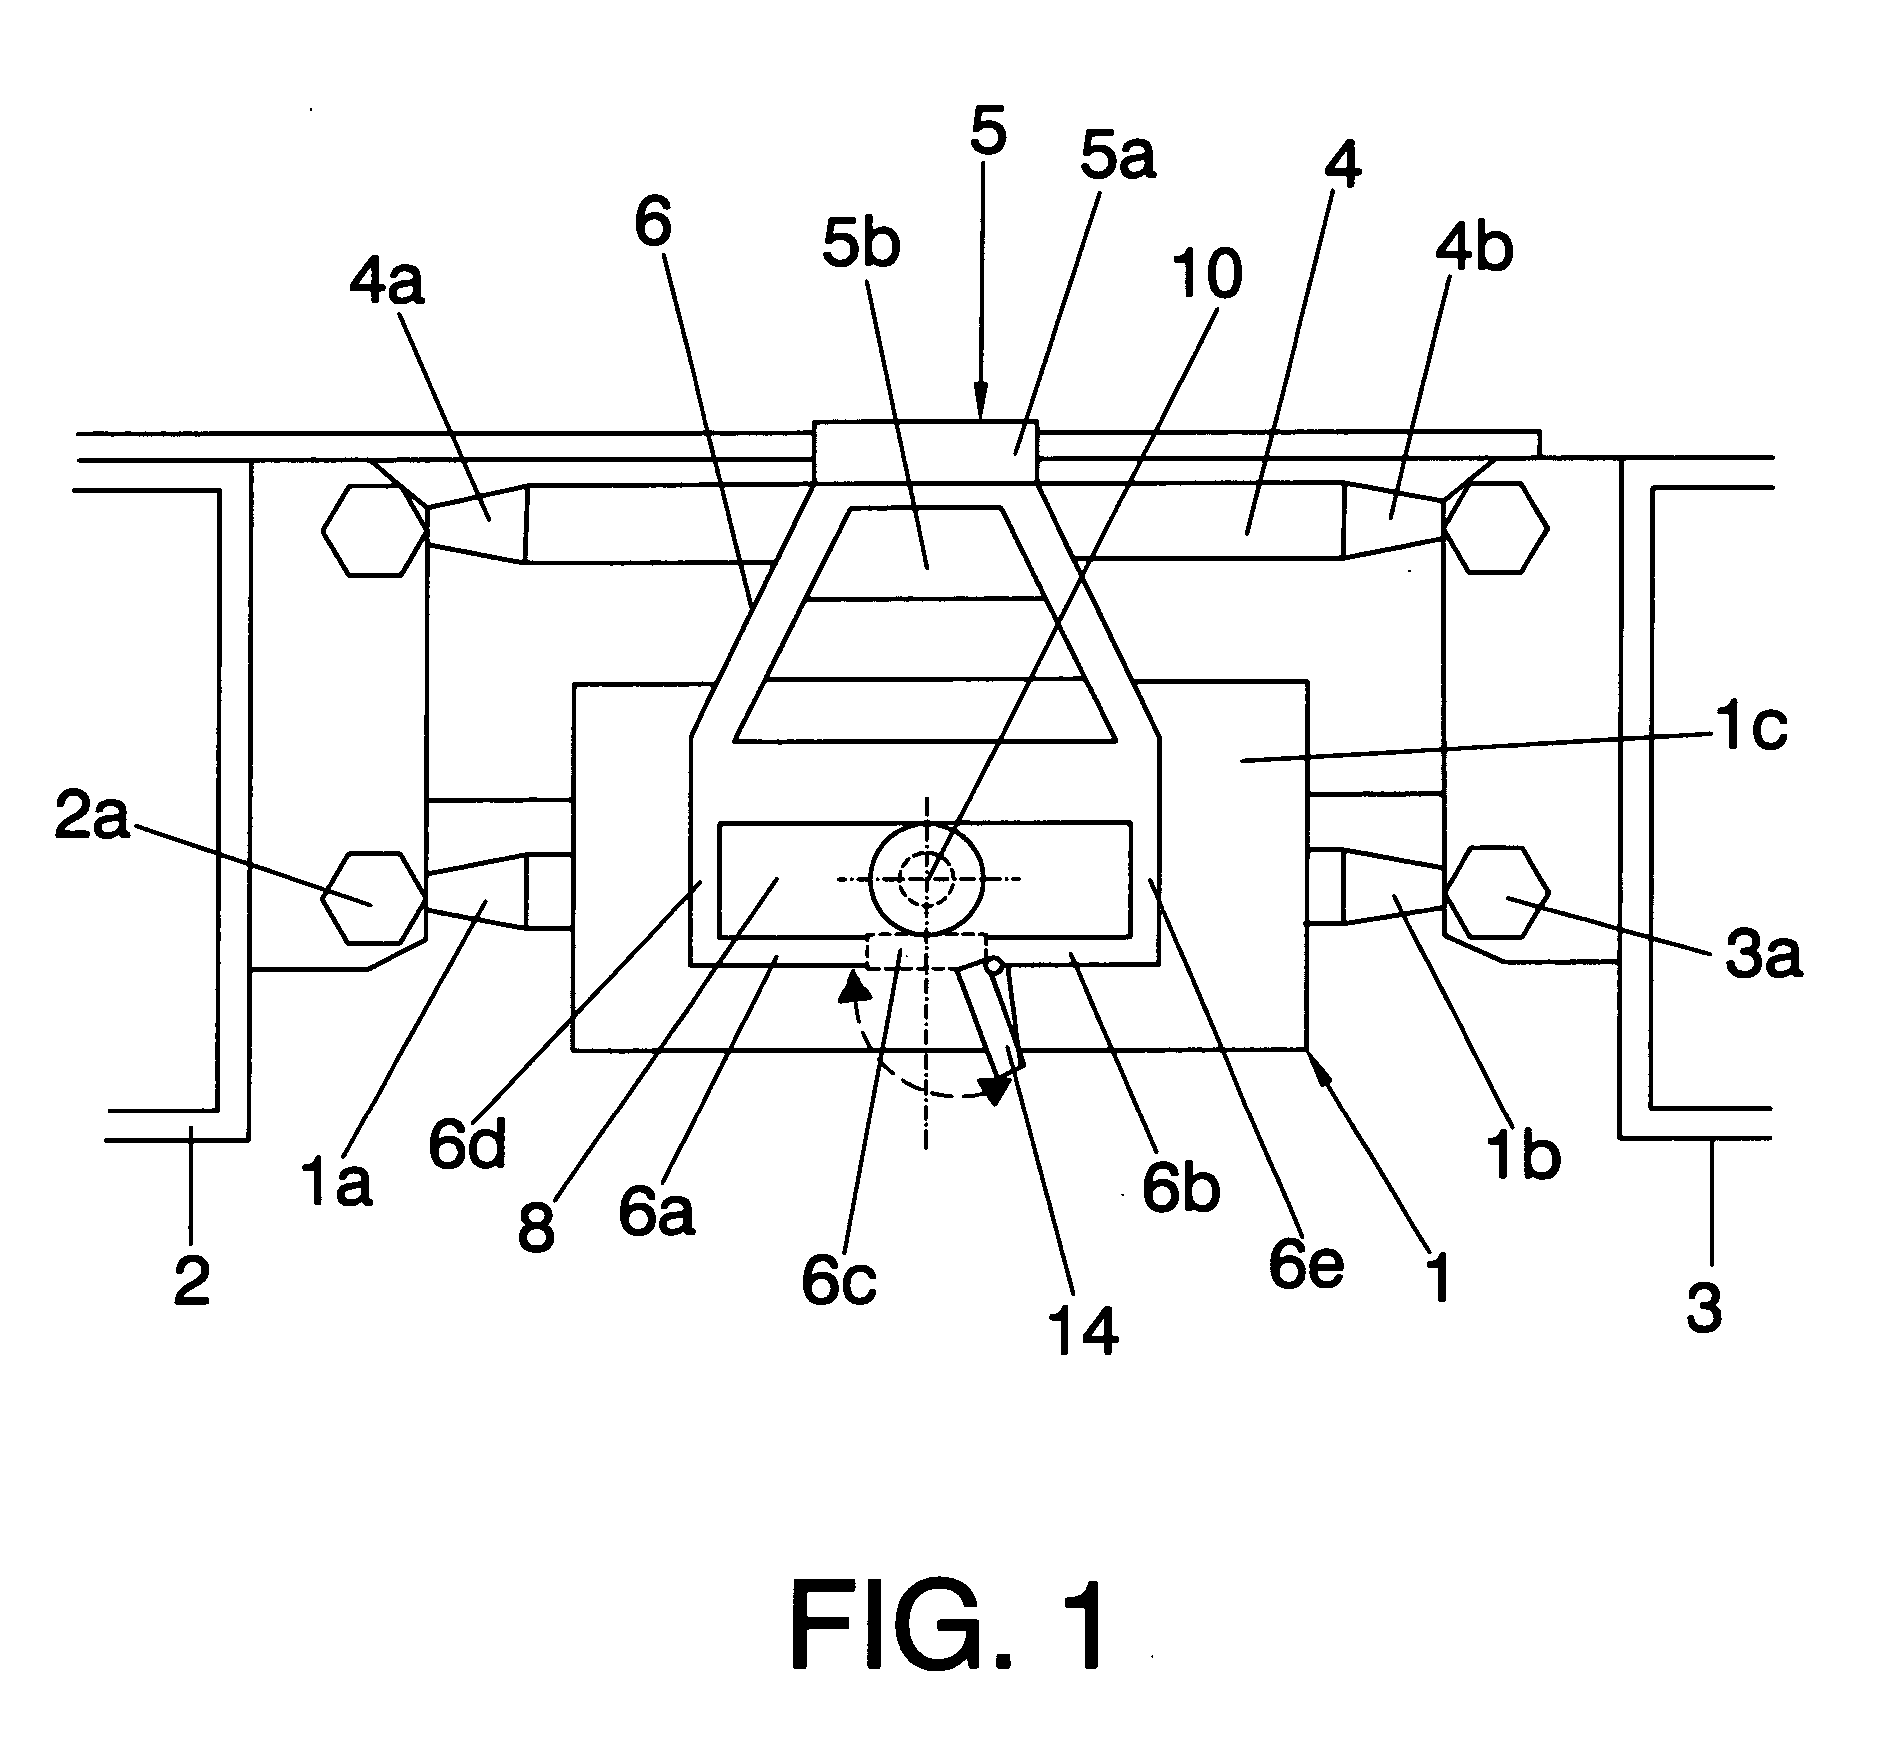 Actuator safety attachment device